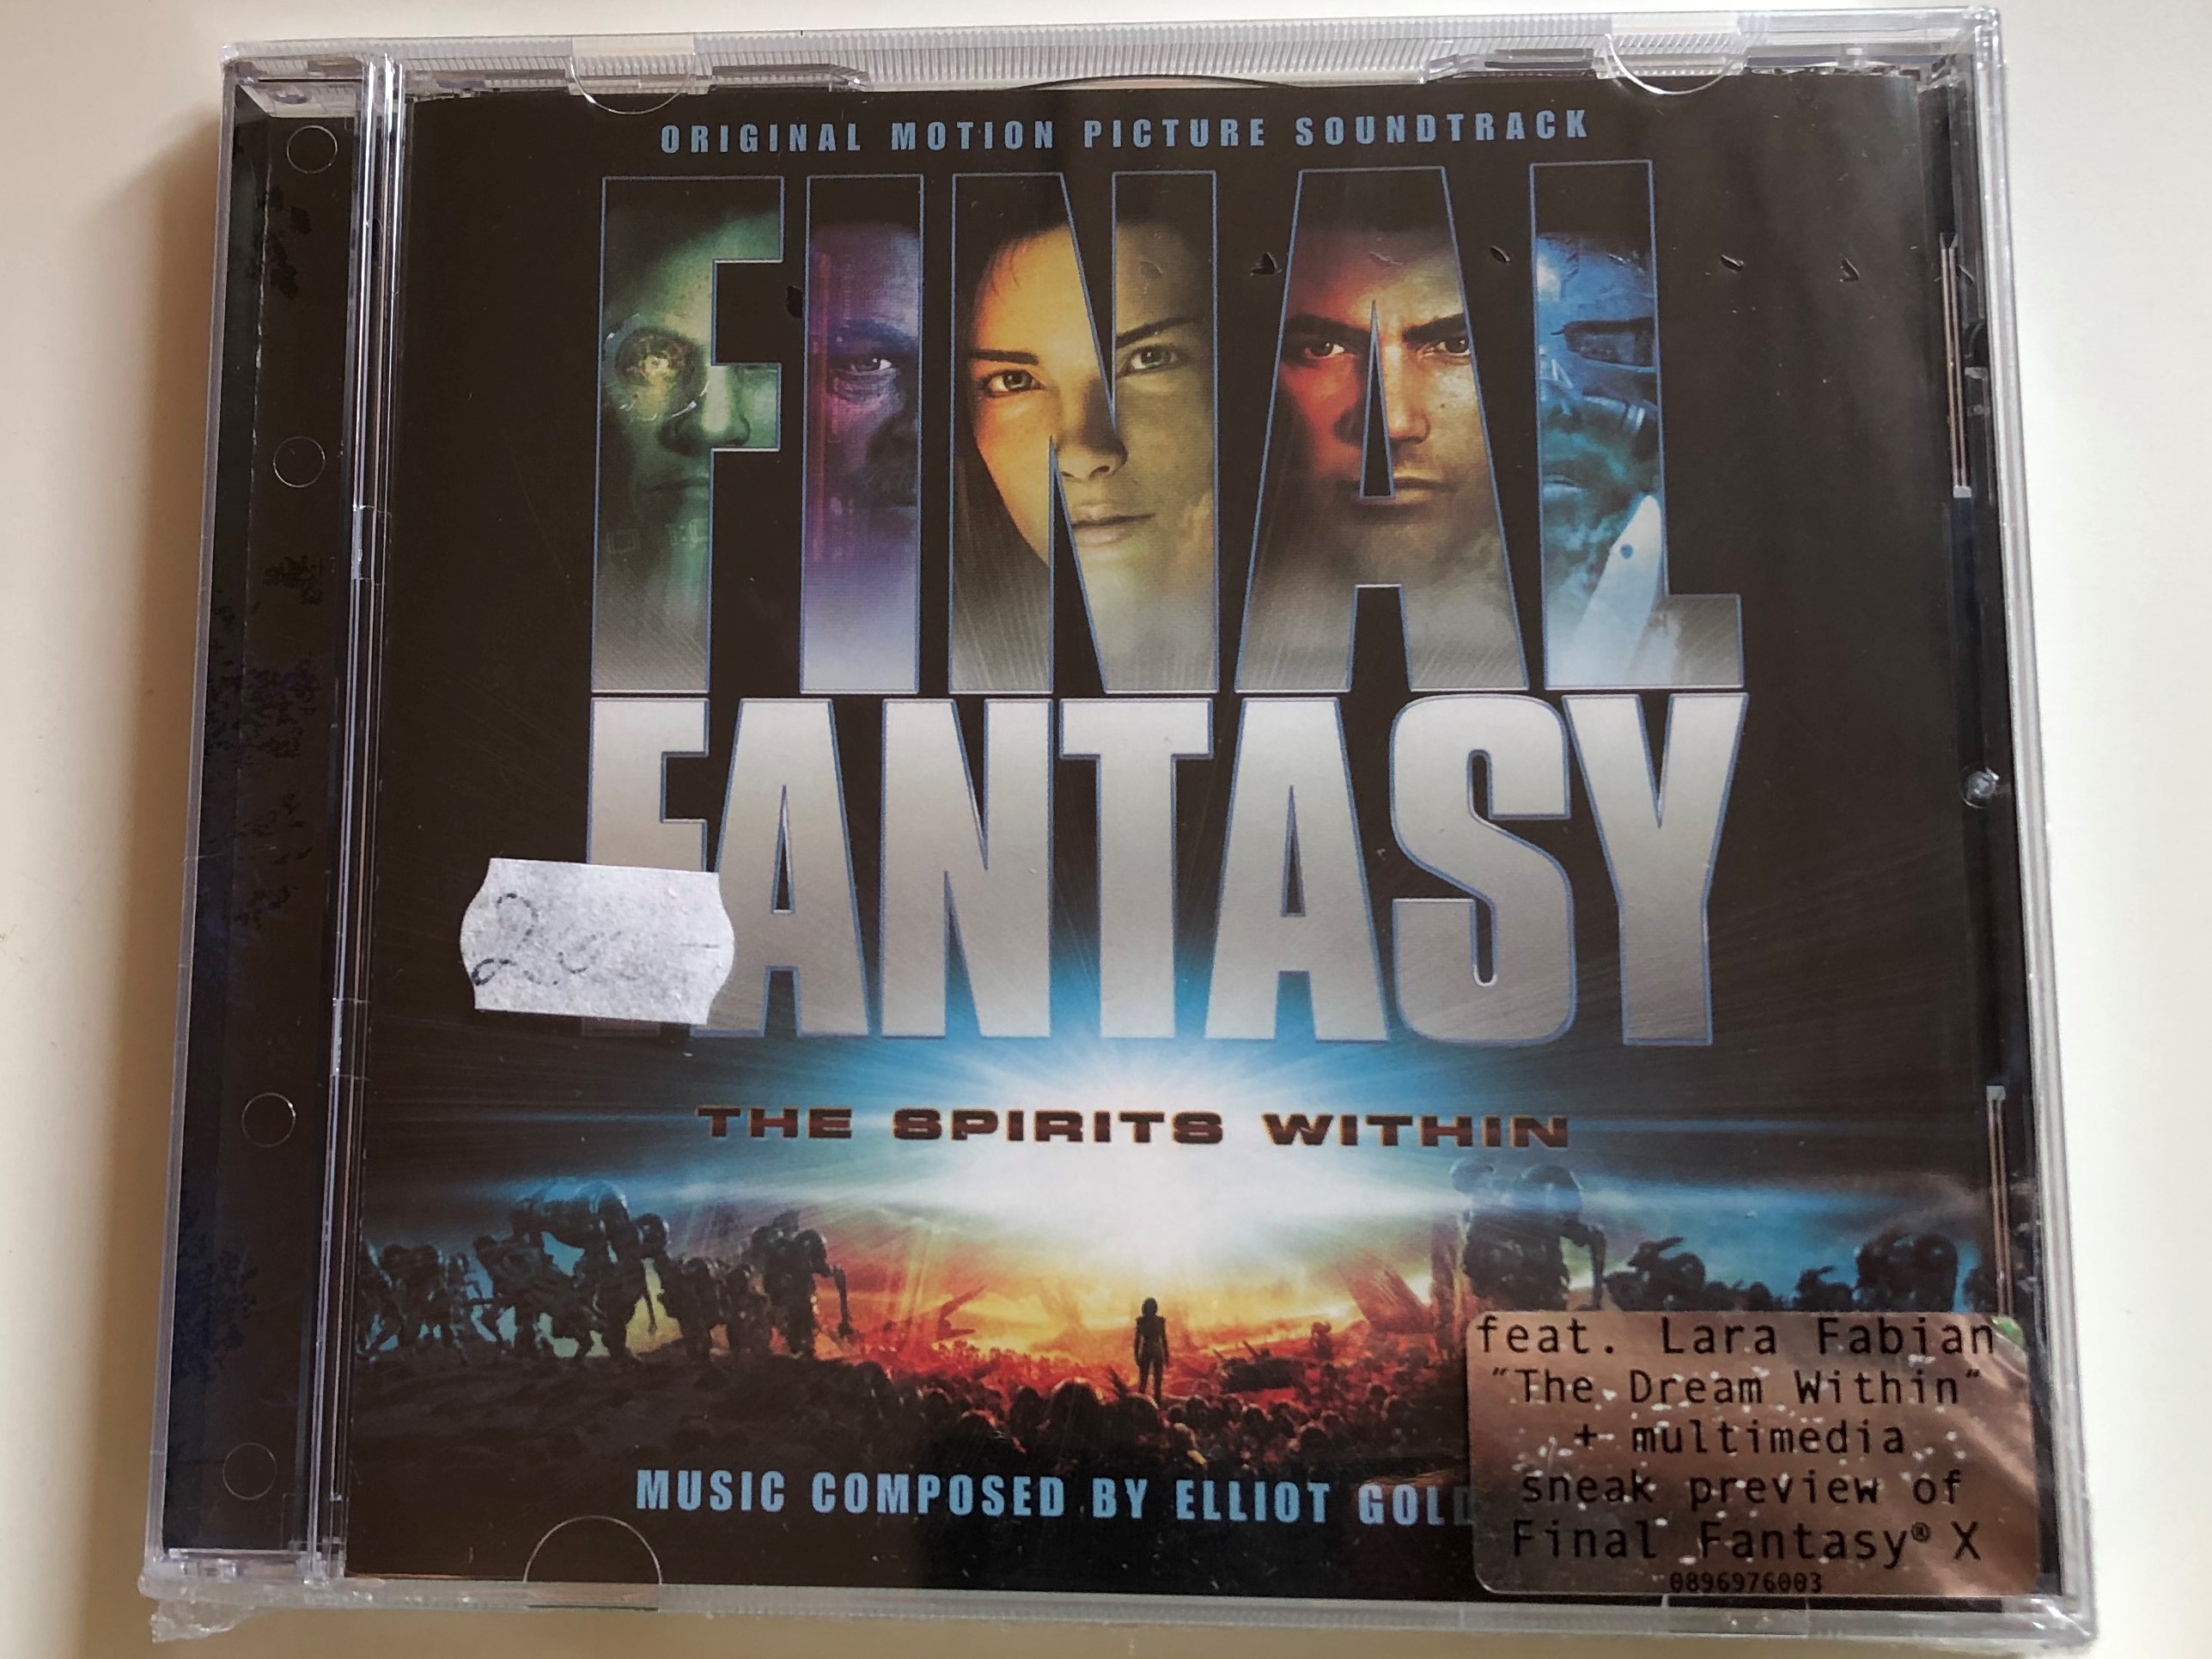 final-fantasy-the-spirits-within-original-motion-picture-soundtrack-music-by-elliot-goldenthal-sony-classical-audio-cd-2001-sk-89697-1-.jpg